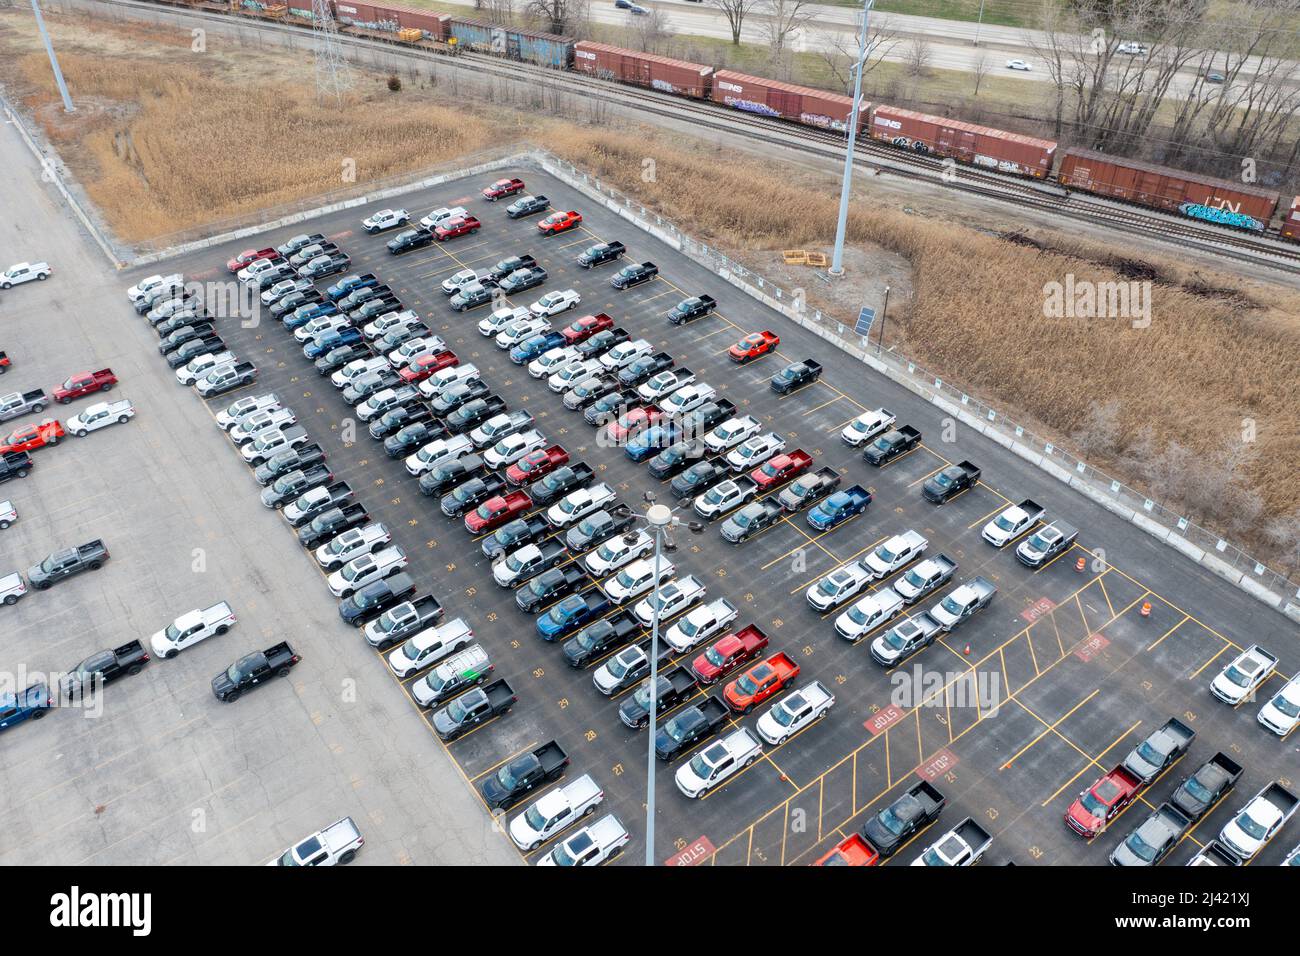 7. April 20222, Ford River Rouge Complex, Ford Motor Company, Dearborn, MI, USA Stockfoto